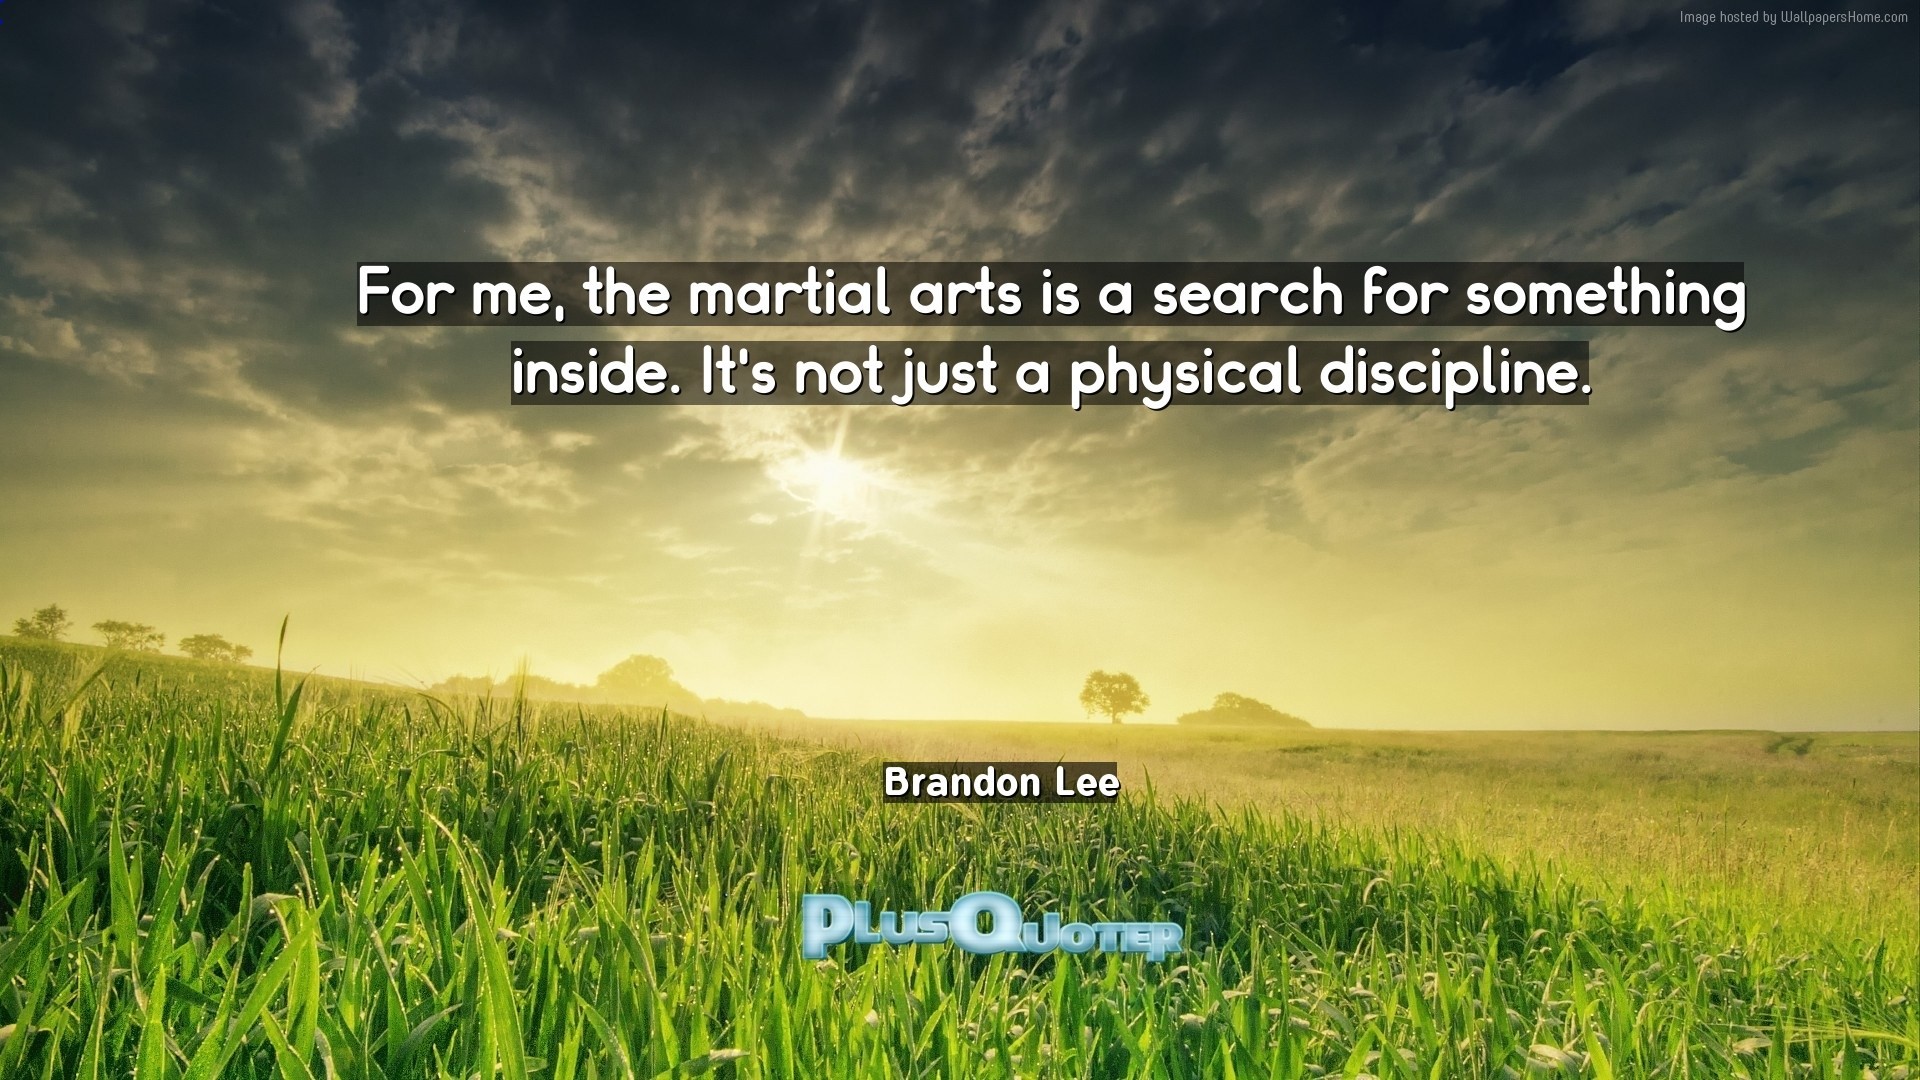 1920x1080 Download Wallpaper with inspirational Quotes- "For me, the martial arts is  a search